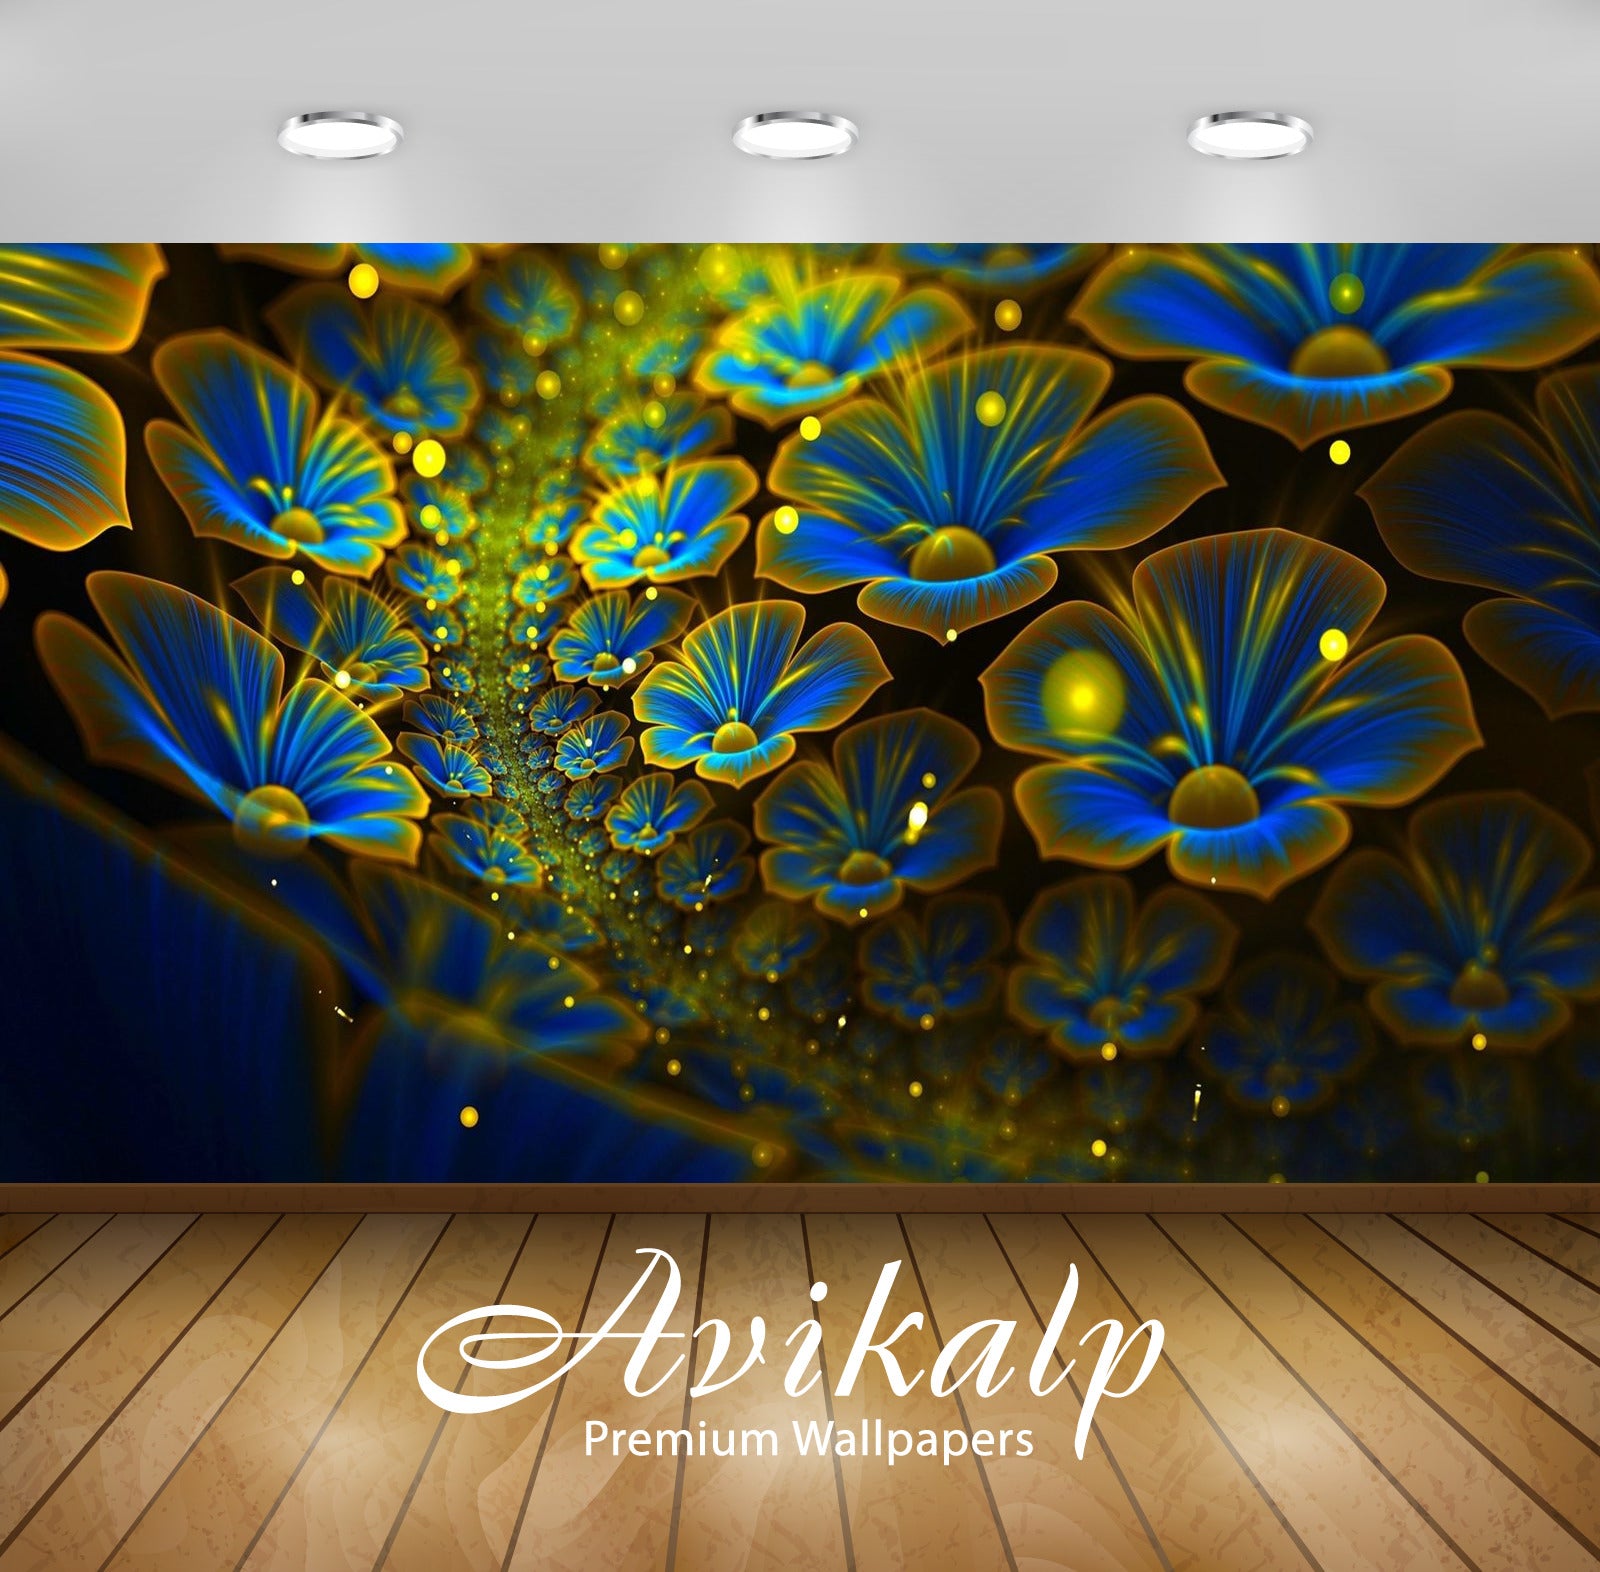 Avikalp Exclusive Awi2673 Glowing Flowers Blue Yellow Full HD Wallpapers for Living room, Hall, Kids